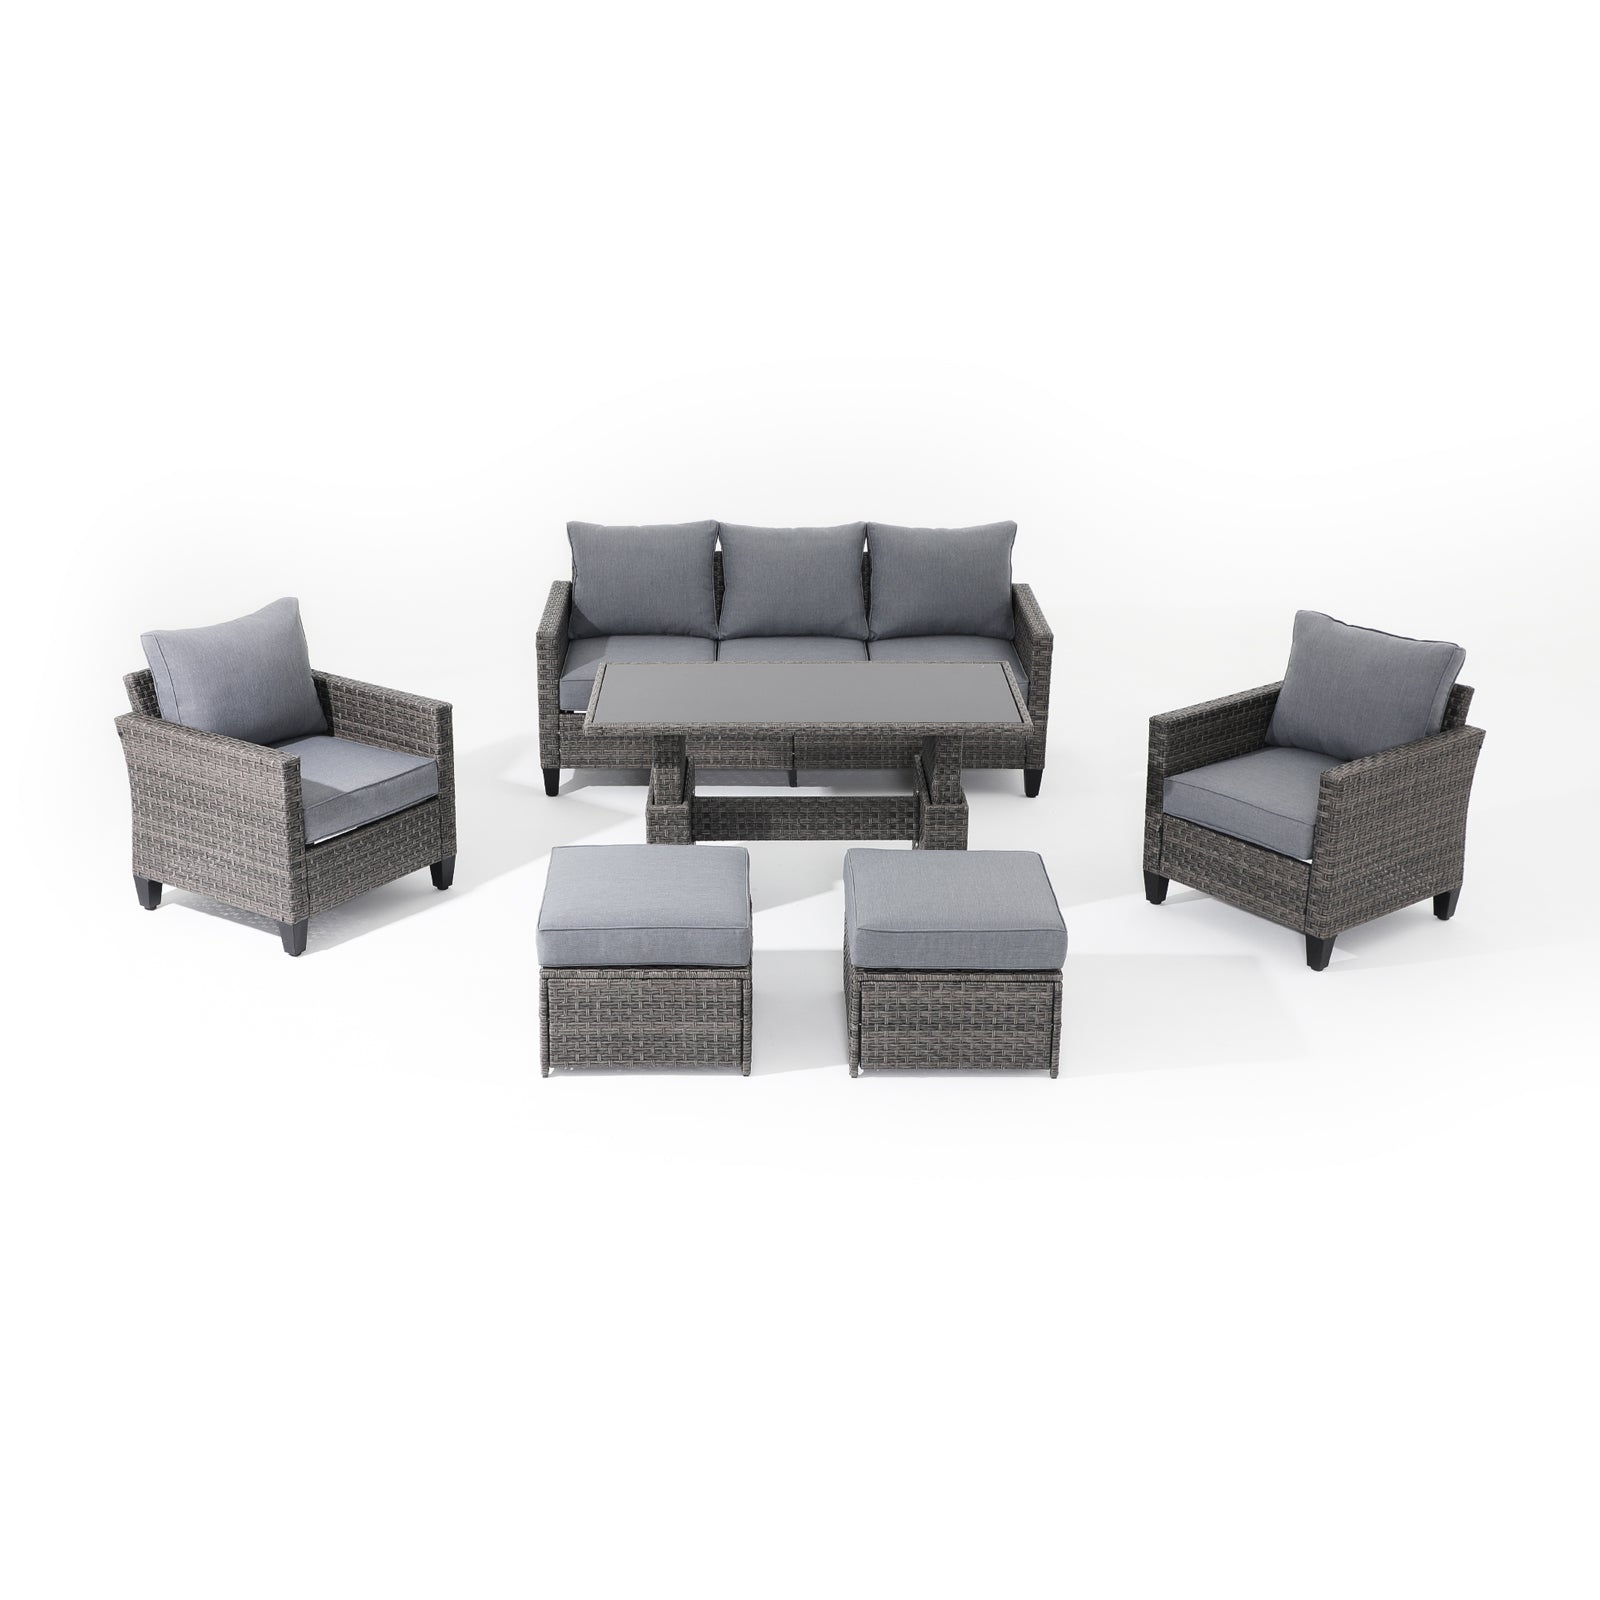 #Piece_6-pc#Color_Grey#Style_with Ottomans & Table